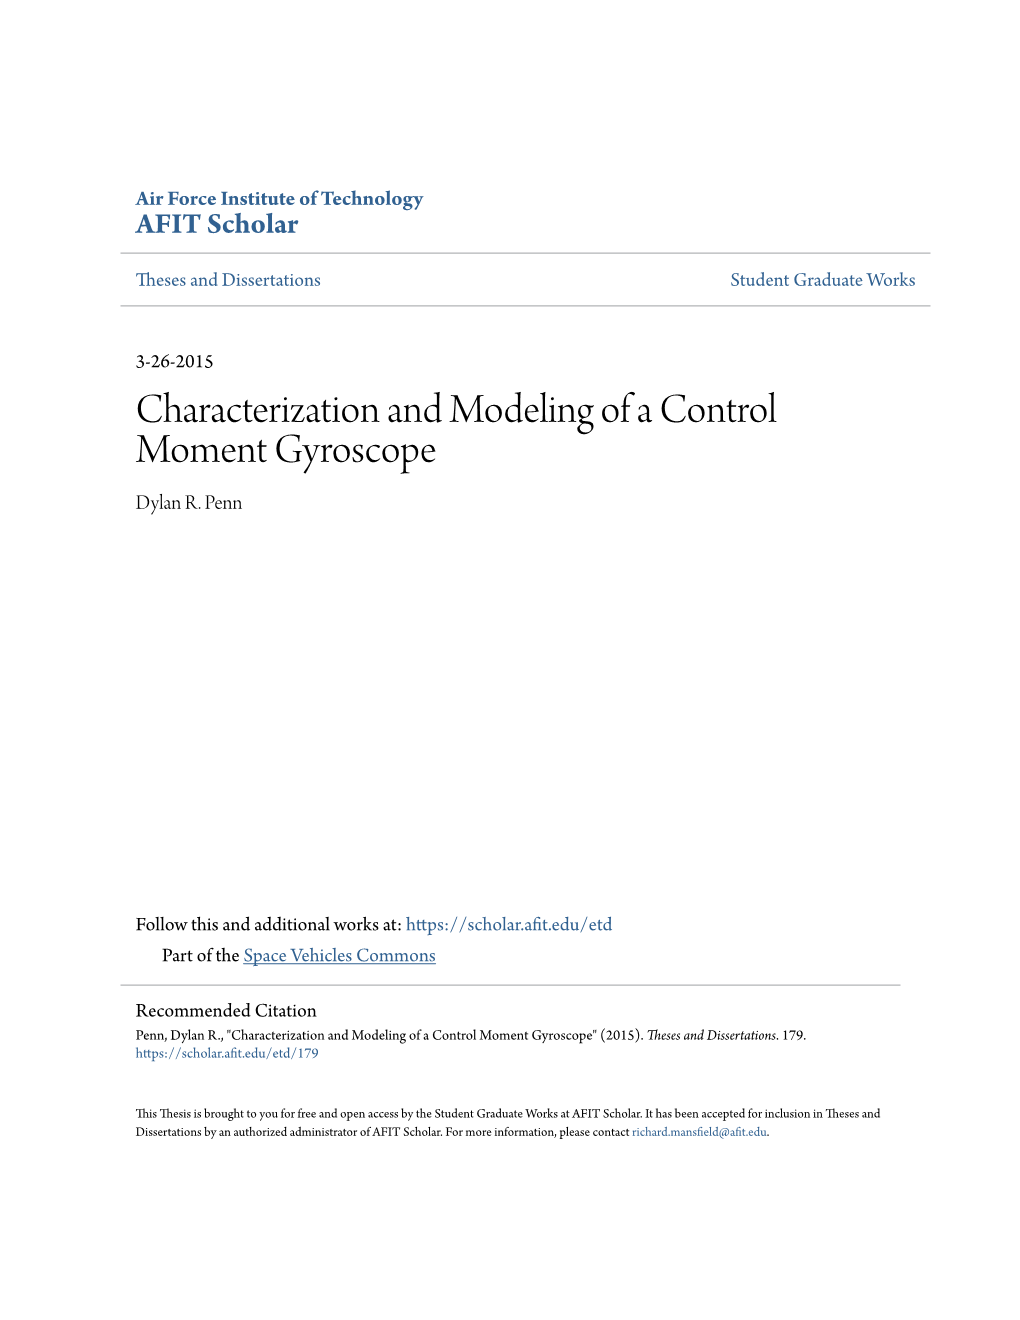 Characterization and Modeling of a Control Moment Gyroscope Dylan R